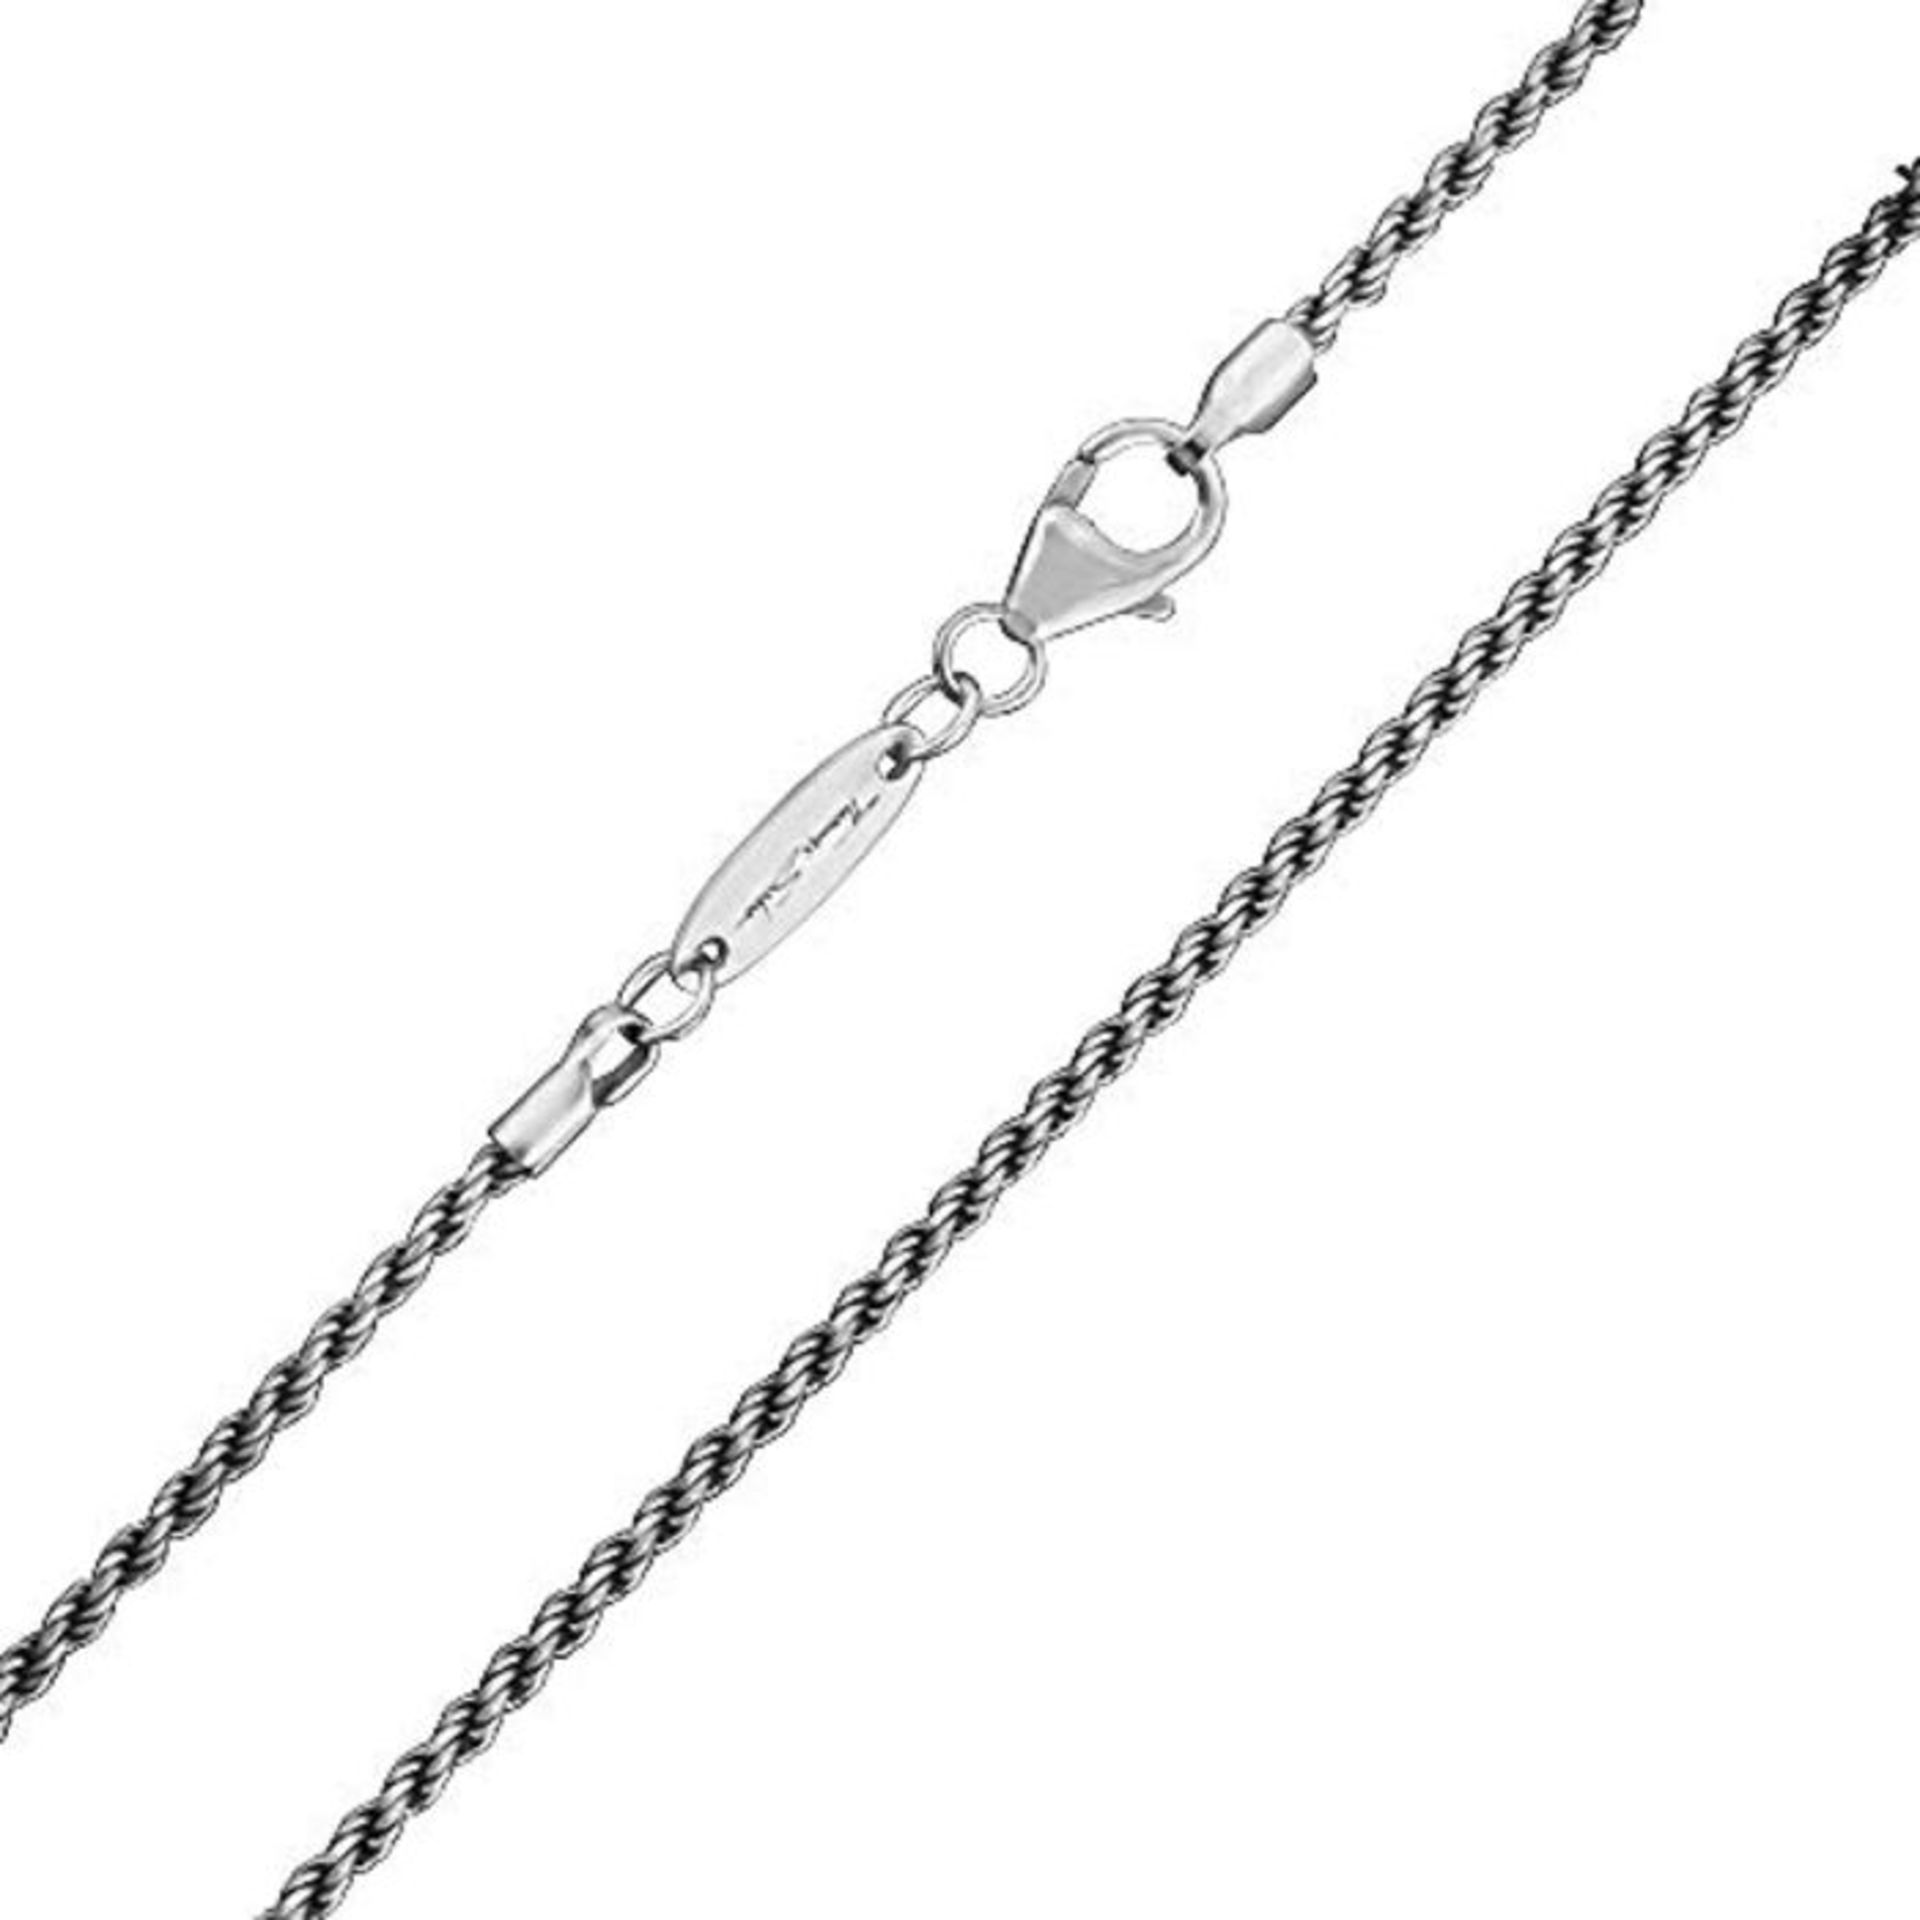 [CRACKED] Thomas Sabo Women's Necklace 925 Sterling Silver Length 40 cm,